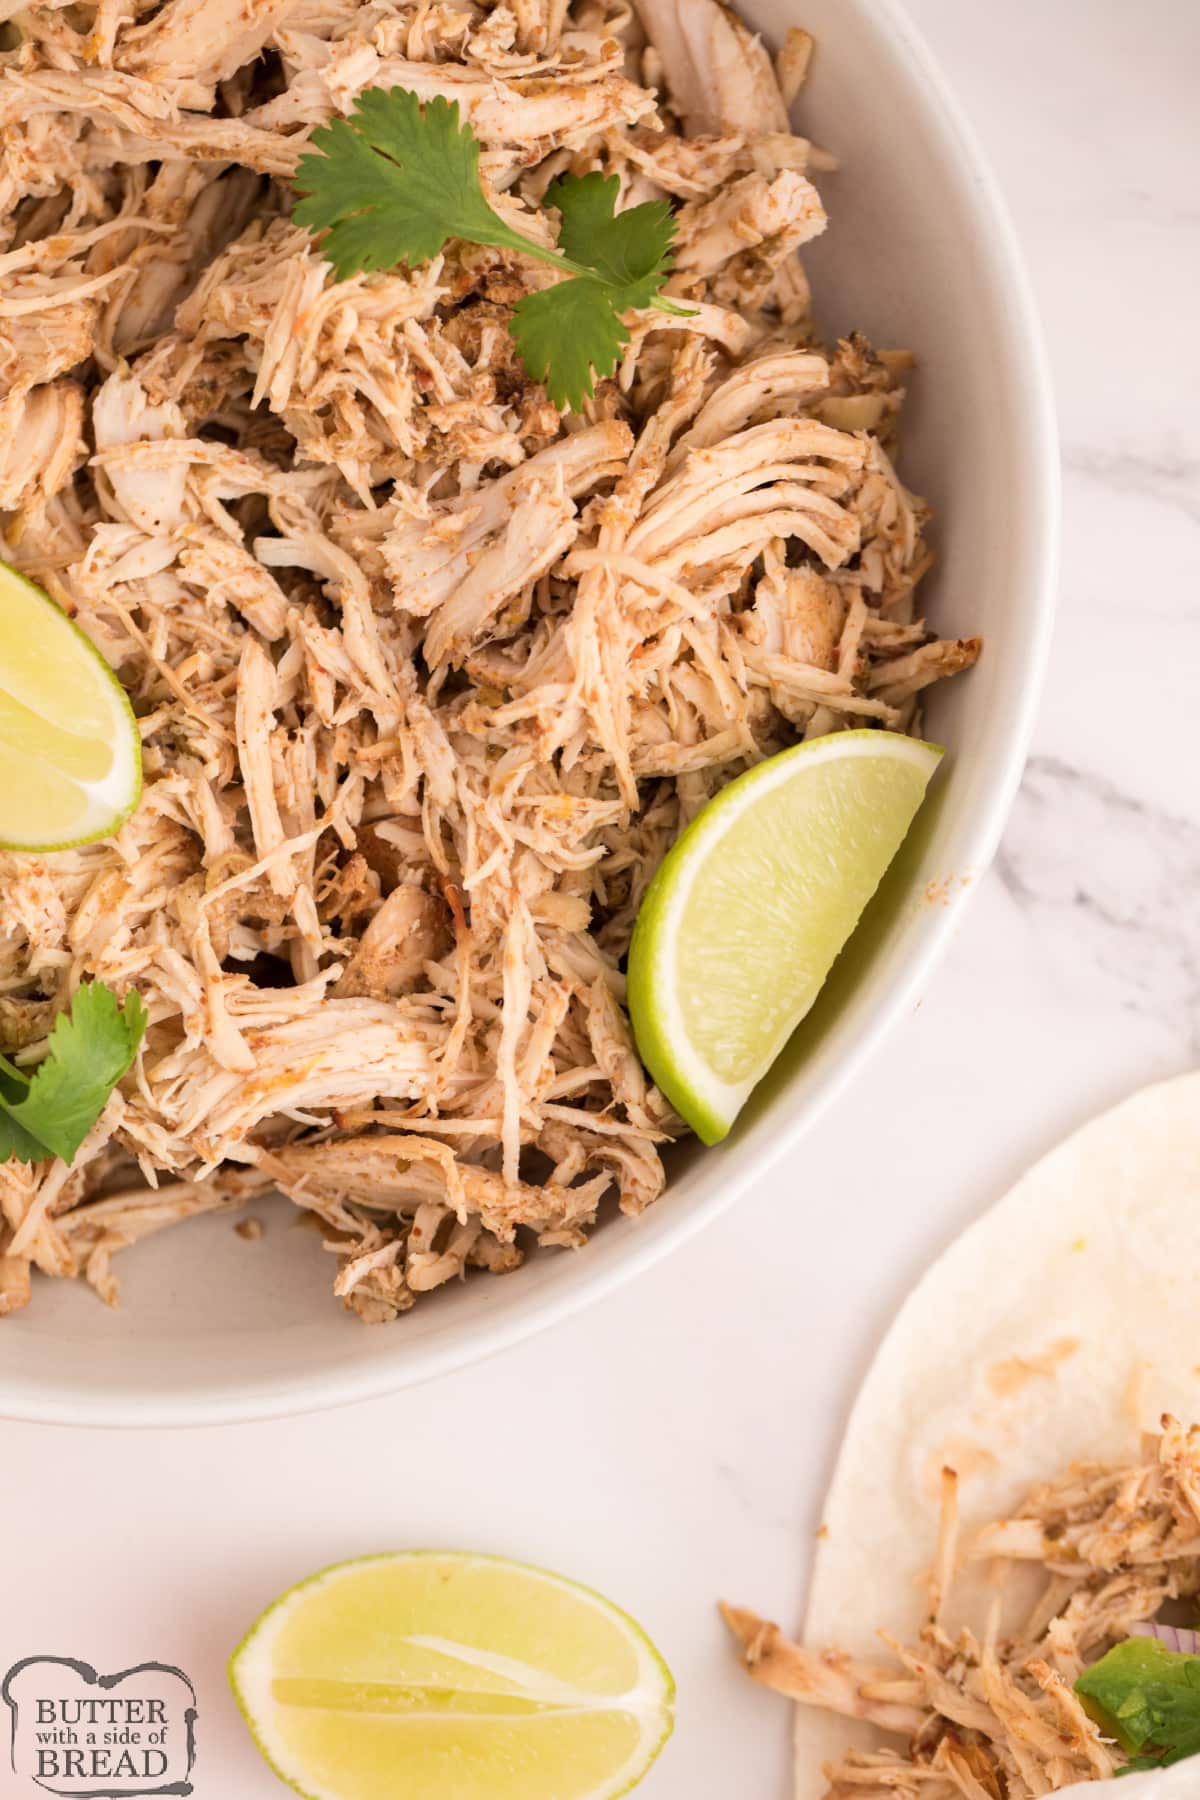 Shredded chicken for burritos and tacos